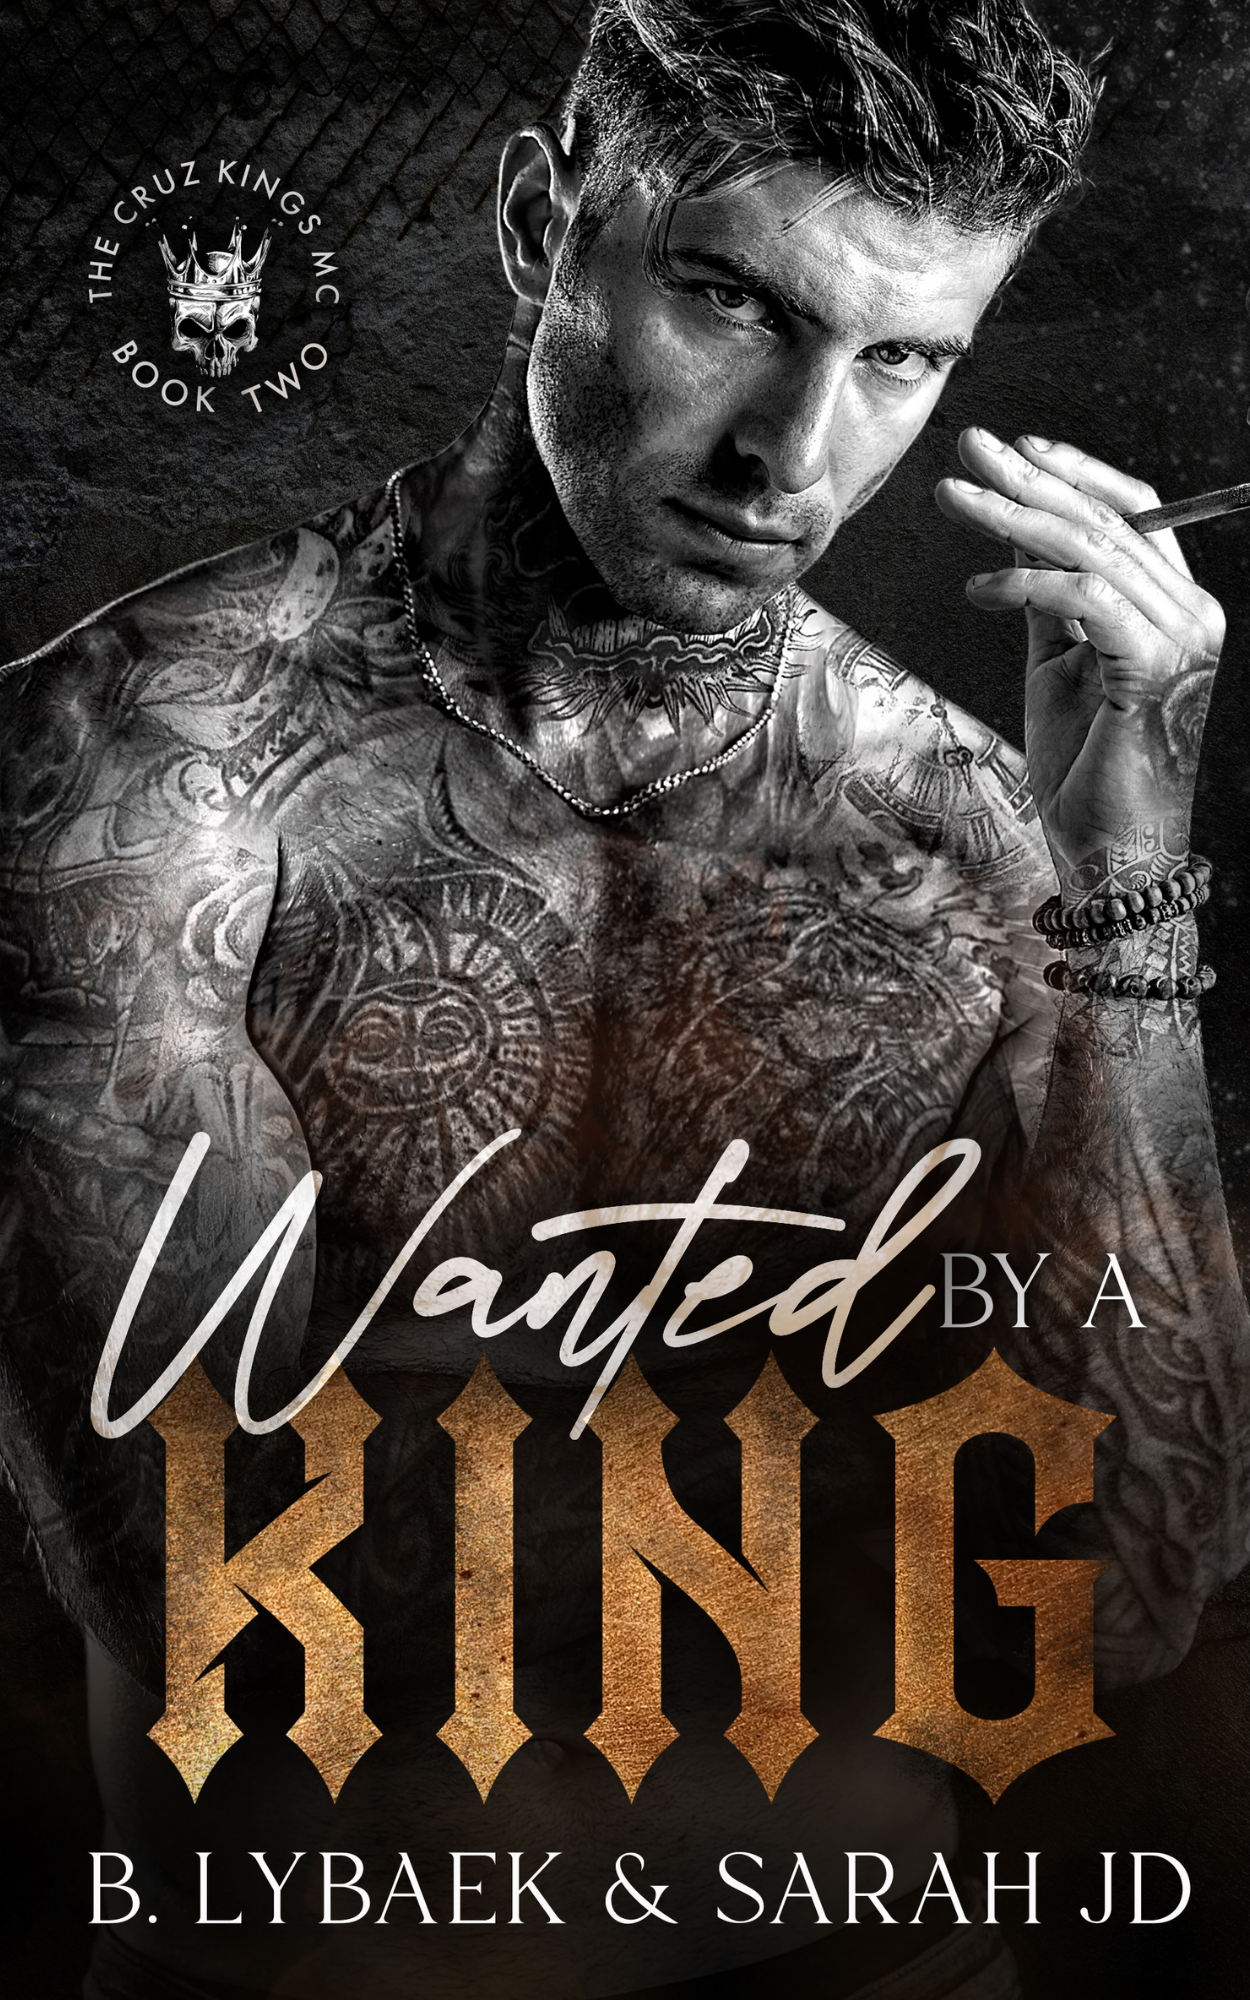 Wanted by a King